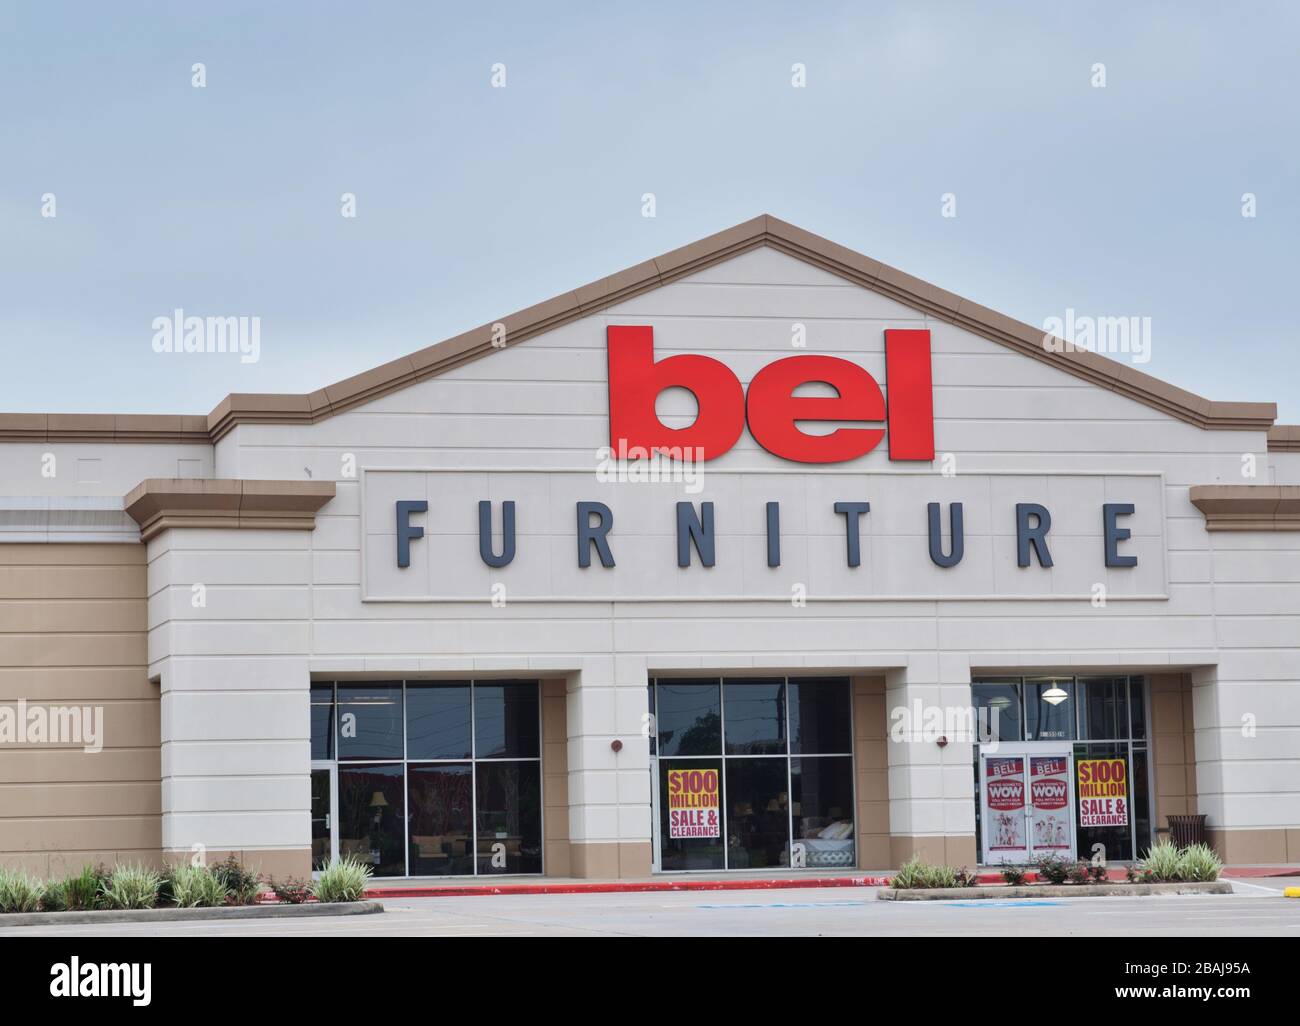 Bel Furniture Store In Houston Tx Texas Based They Are A